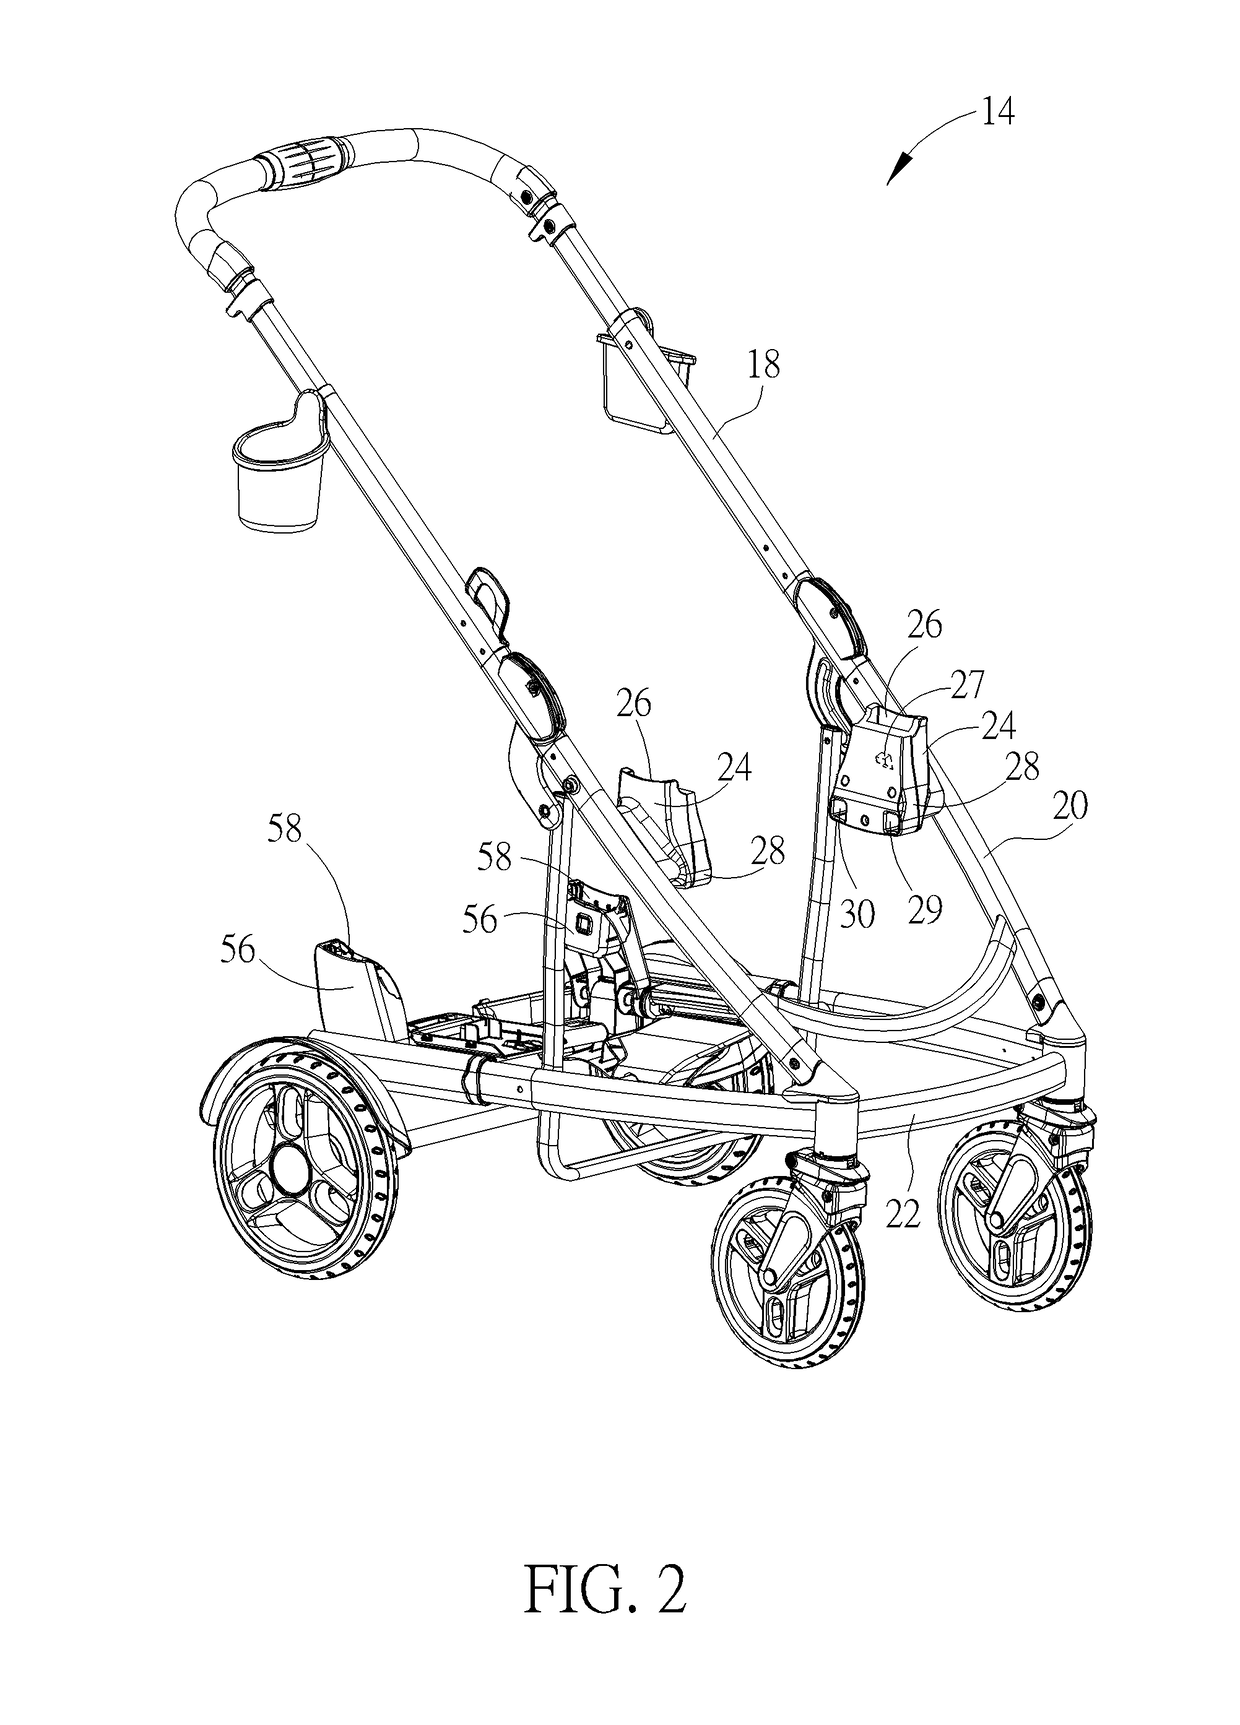 Basket and stroller apparatus thereof